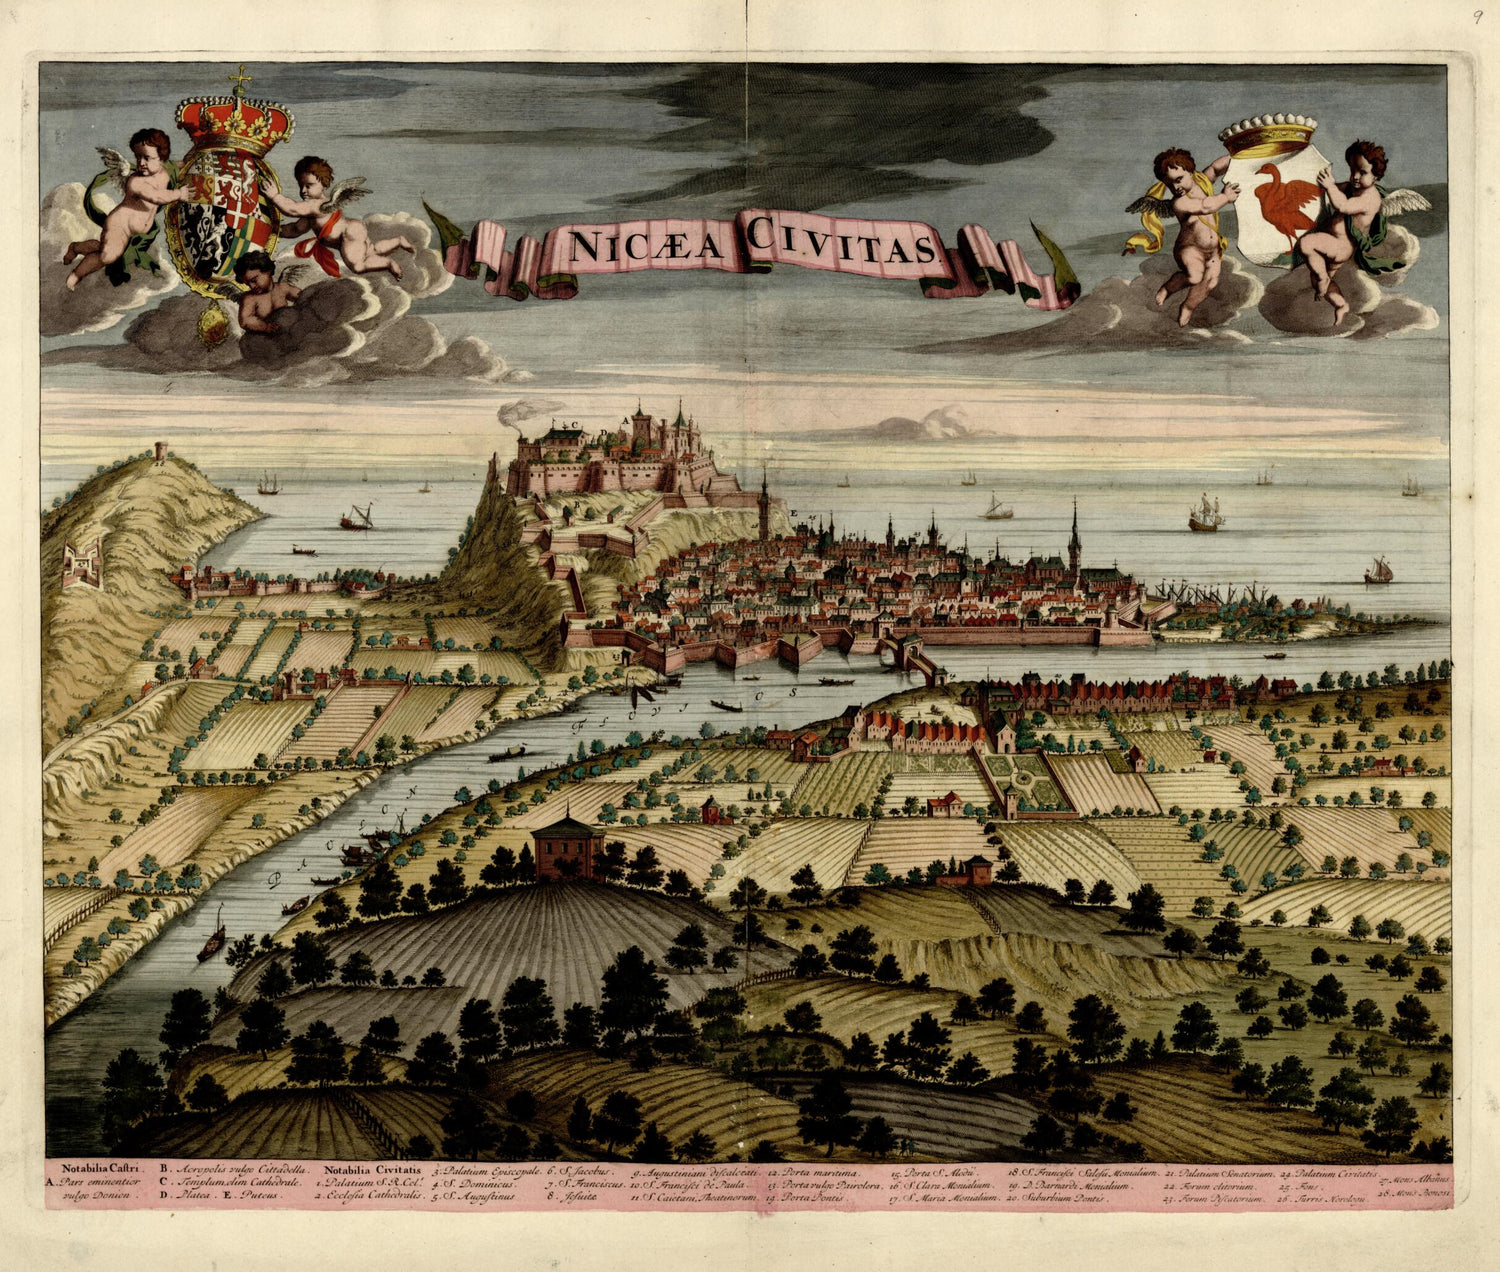 This old map of Nicaea Civitas from a Collection of Plans of Fortifications and Battles, 1684-from 1709 from 1709 was created by Anna Beeck in 1709